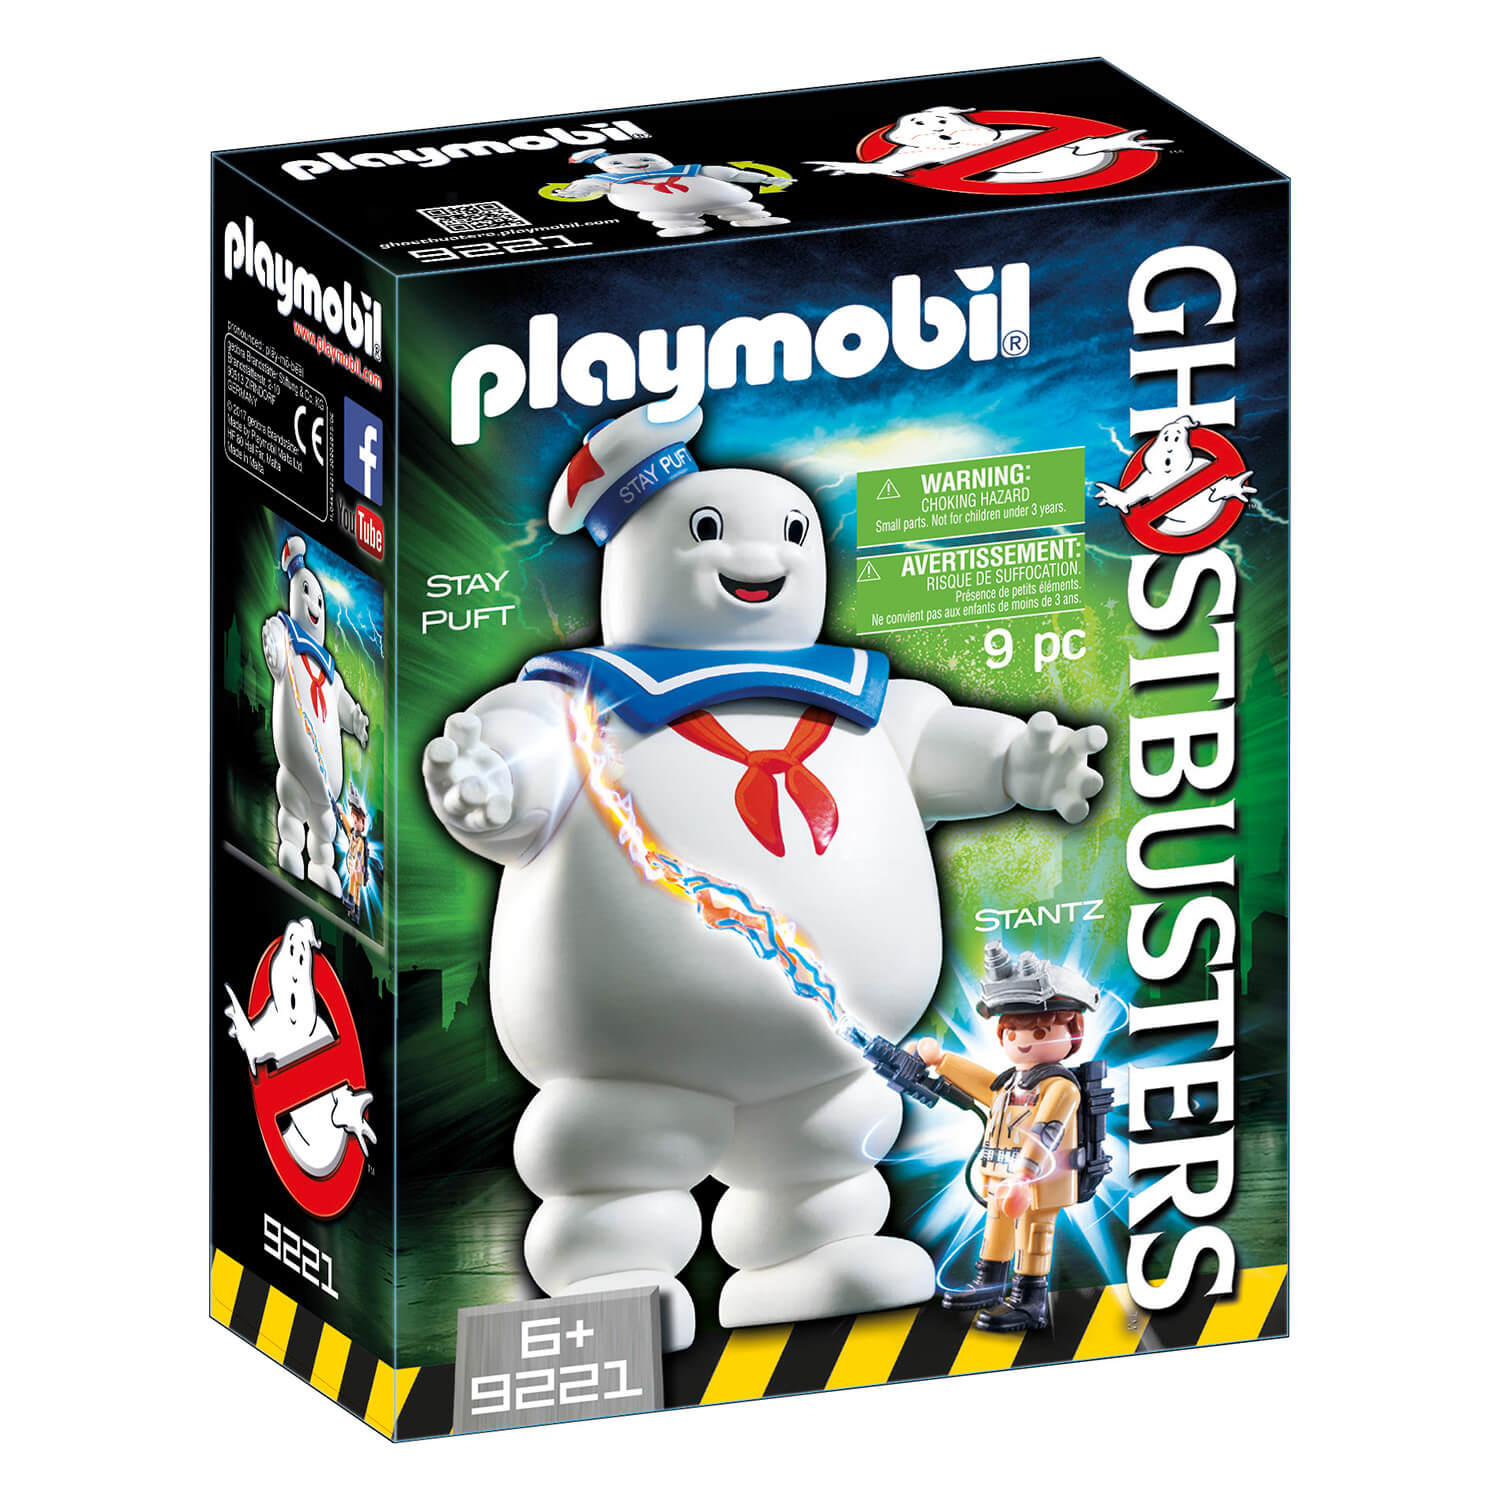 PLAYMOBIL Ghostbusters Stay Puft Marshmallow Man (9221)